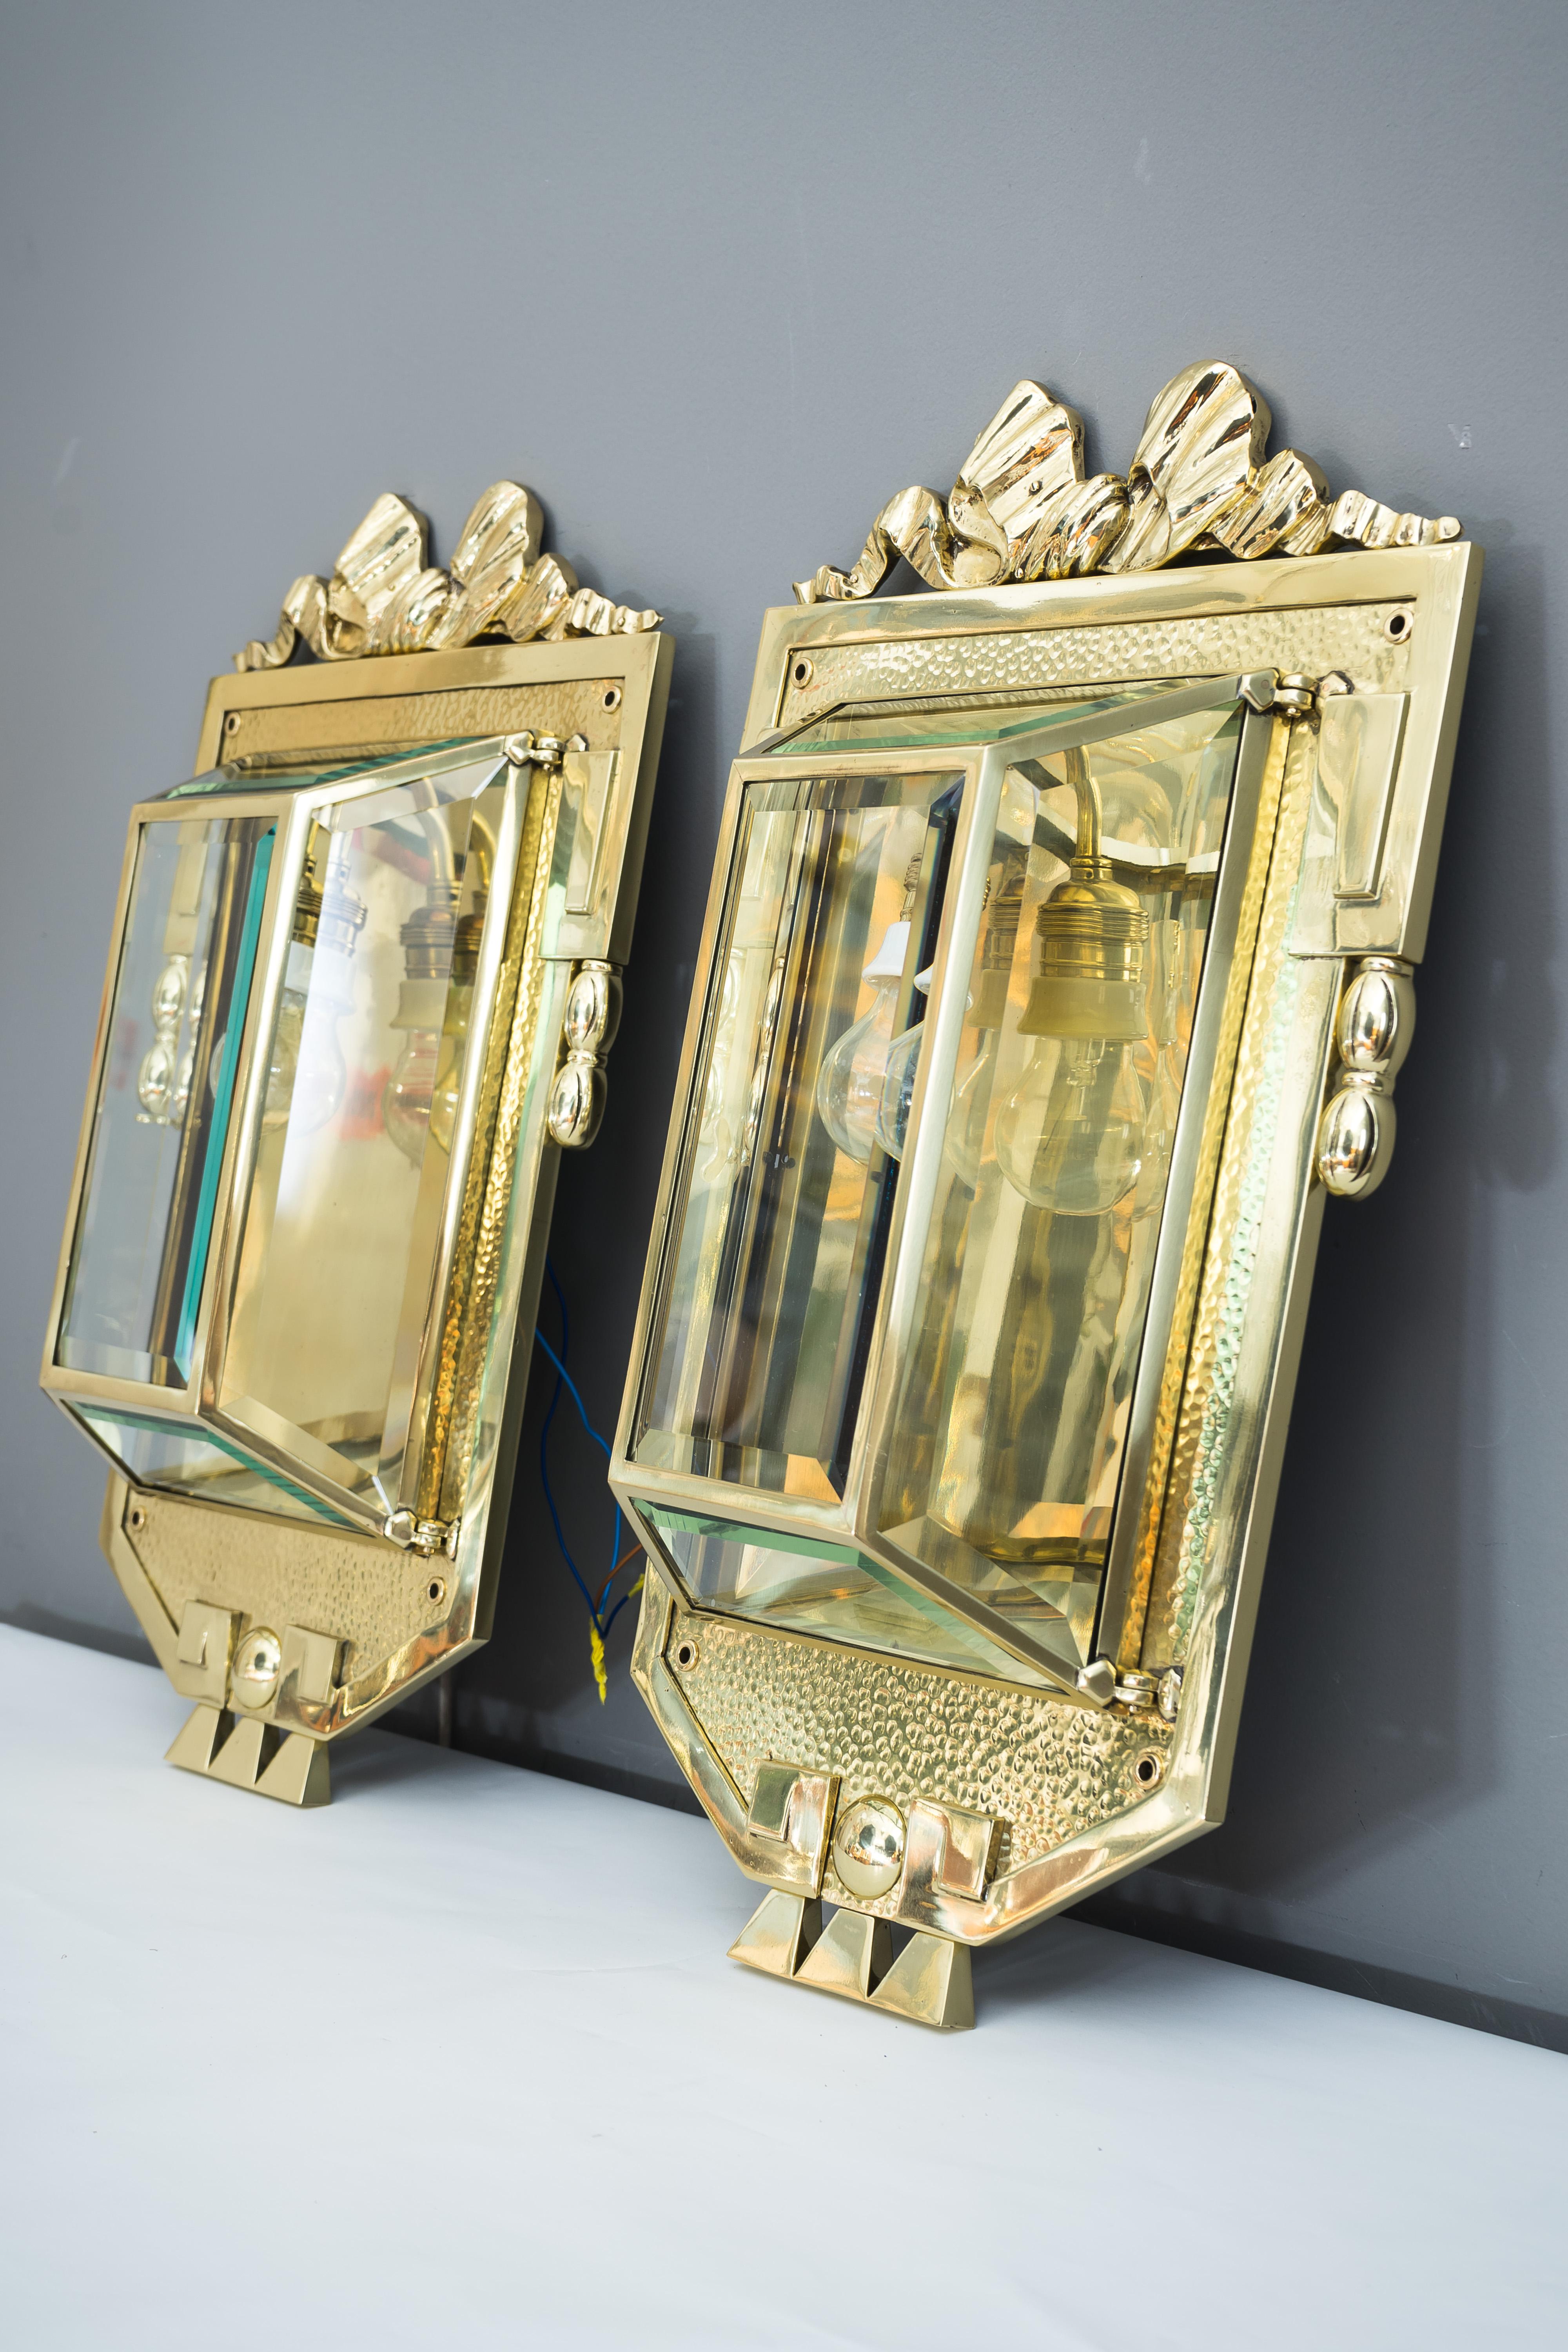 Lacquered Two Big Jugendstil Wall Lamps with Cut Glass, Vienna, circa 1910s